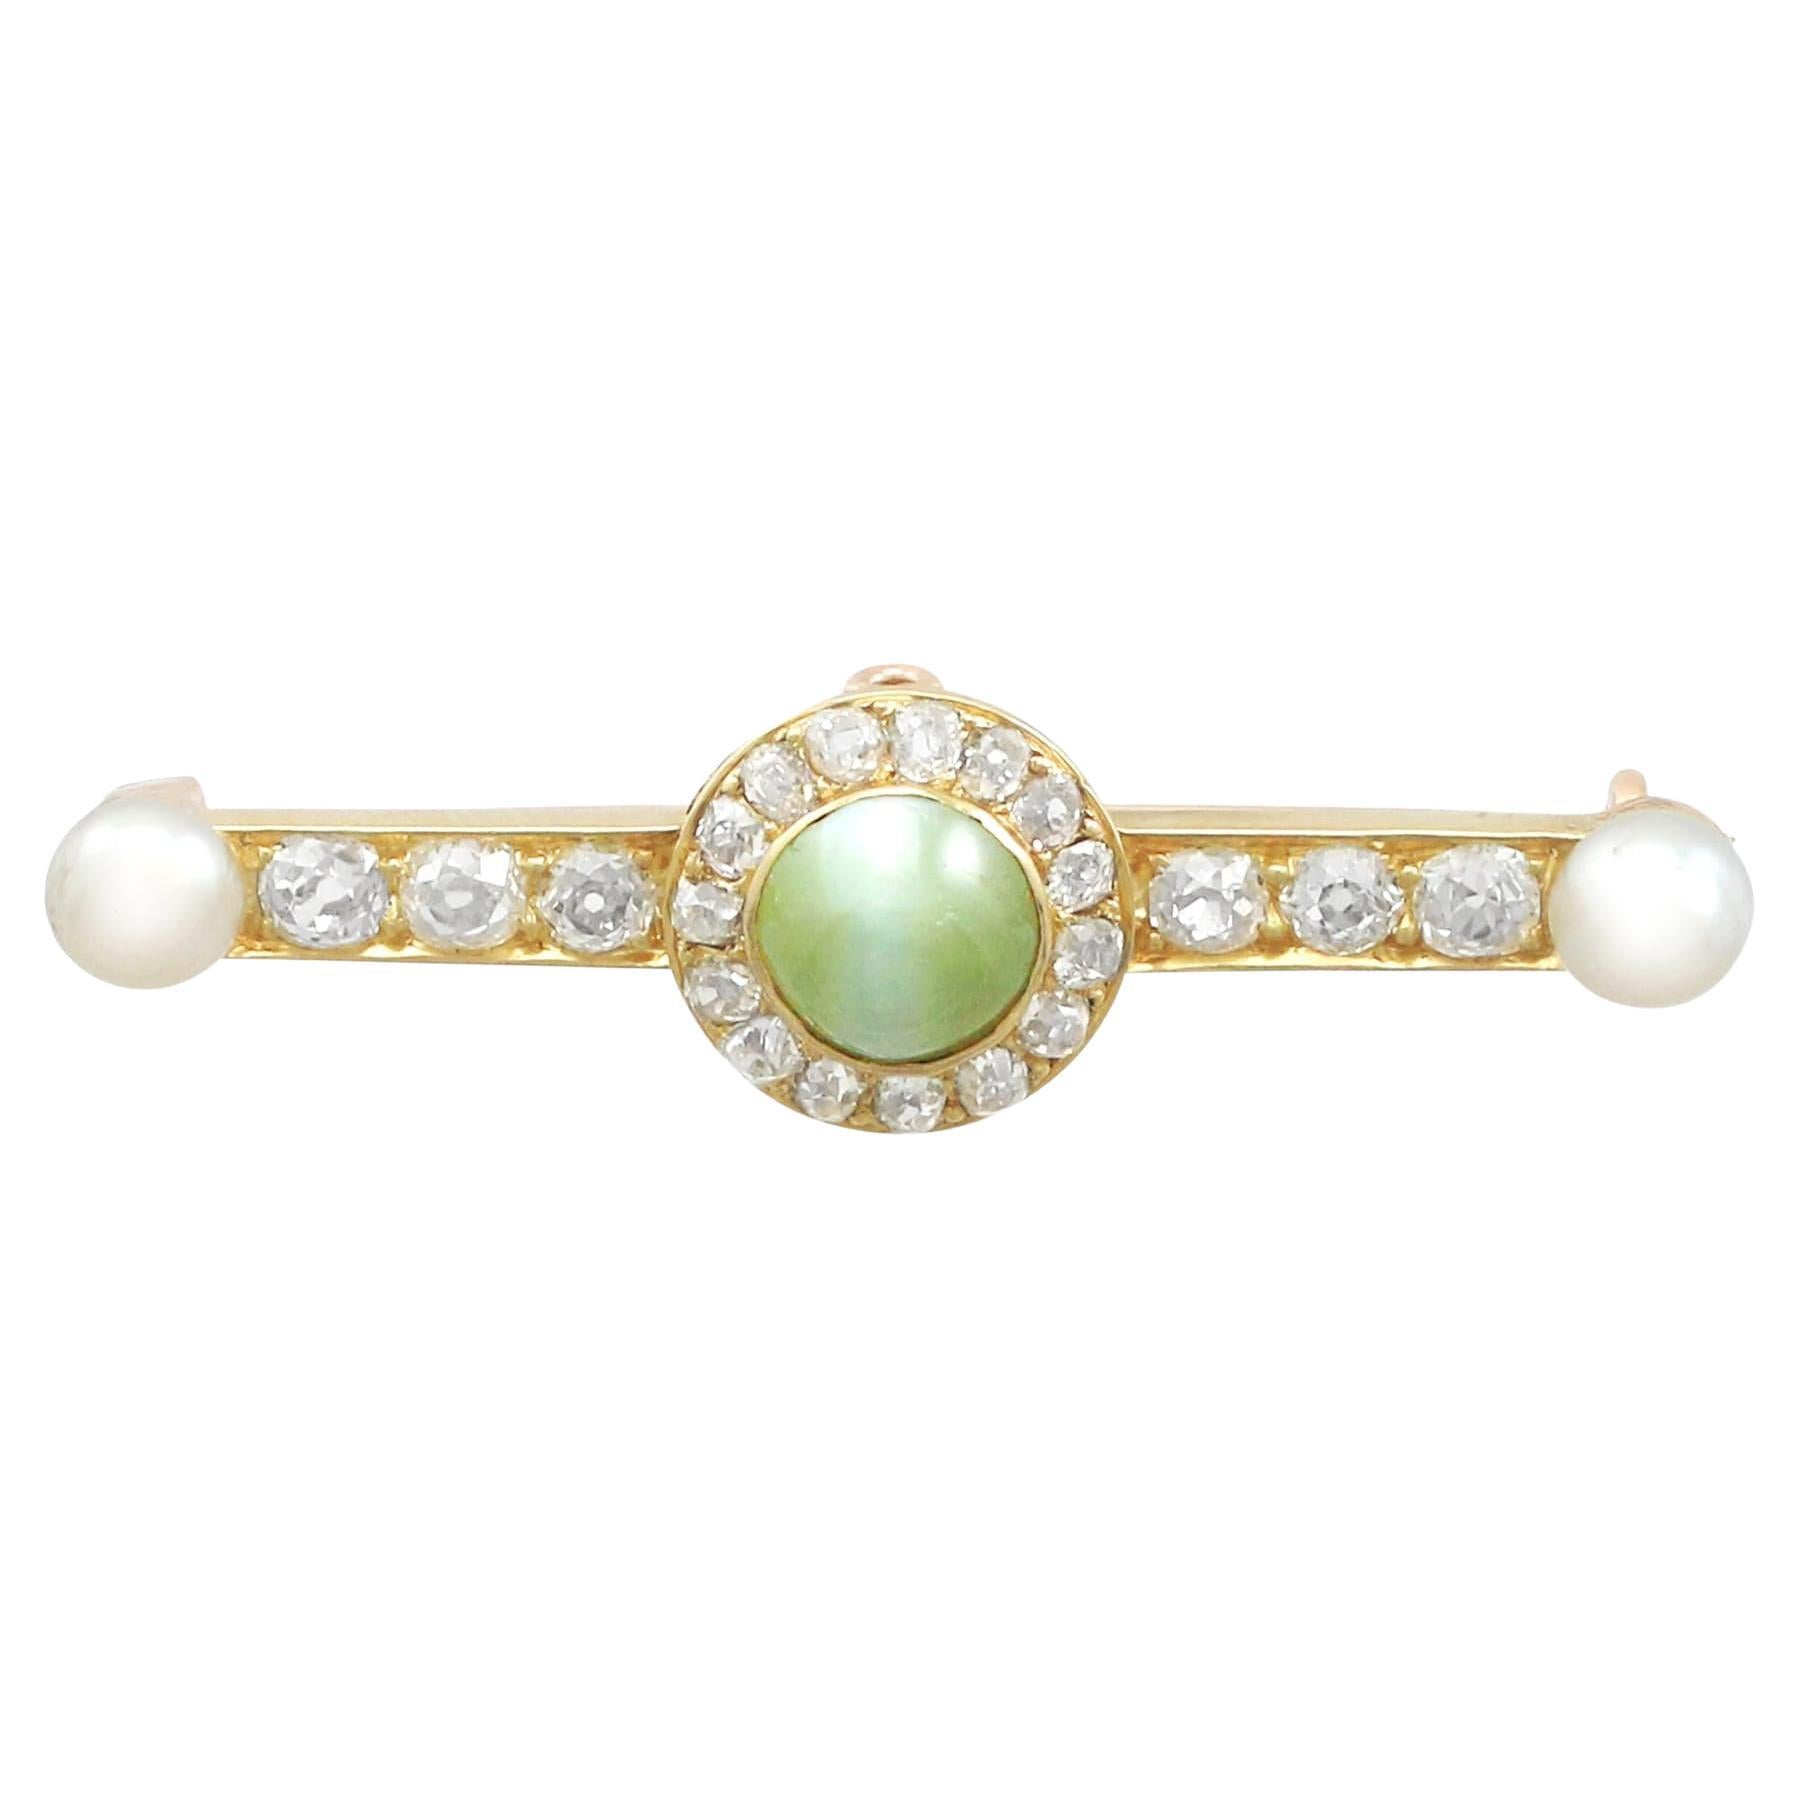 1.55Ct Cabochon Cut Chrysoberyl and 1.10Ct Diamond Pearl and Gold Bar Brooch For Sale